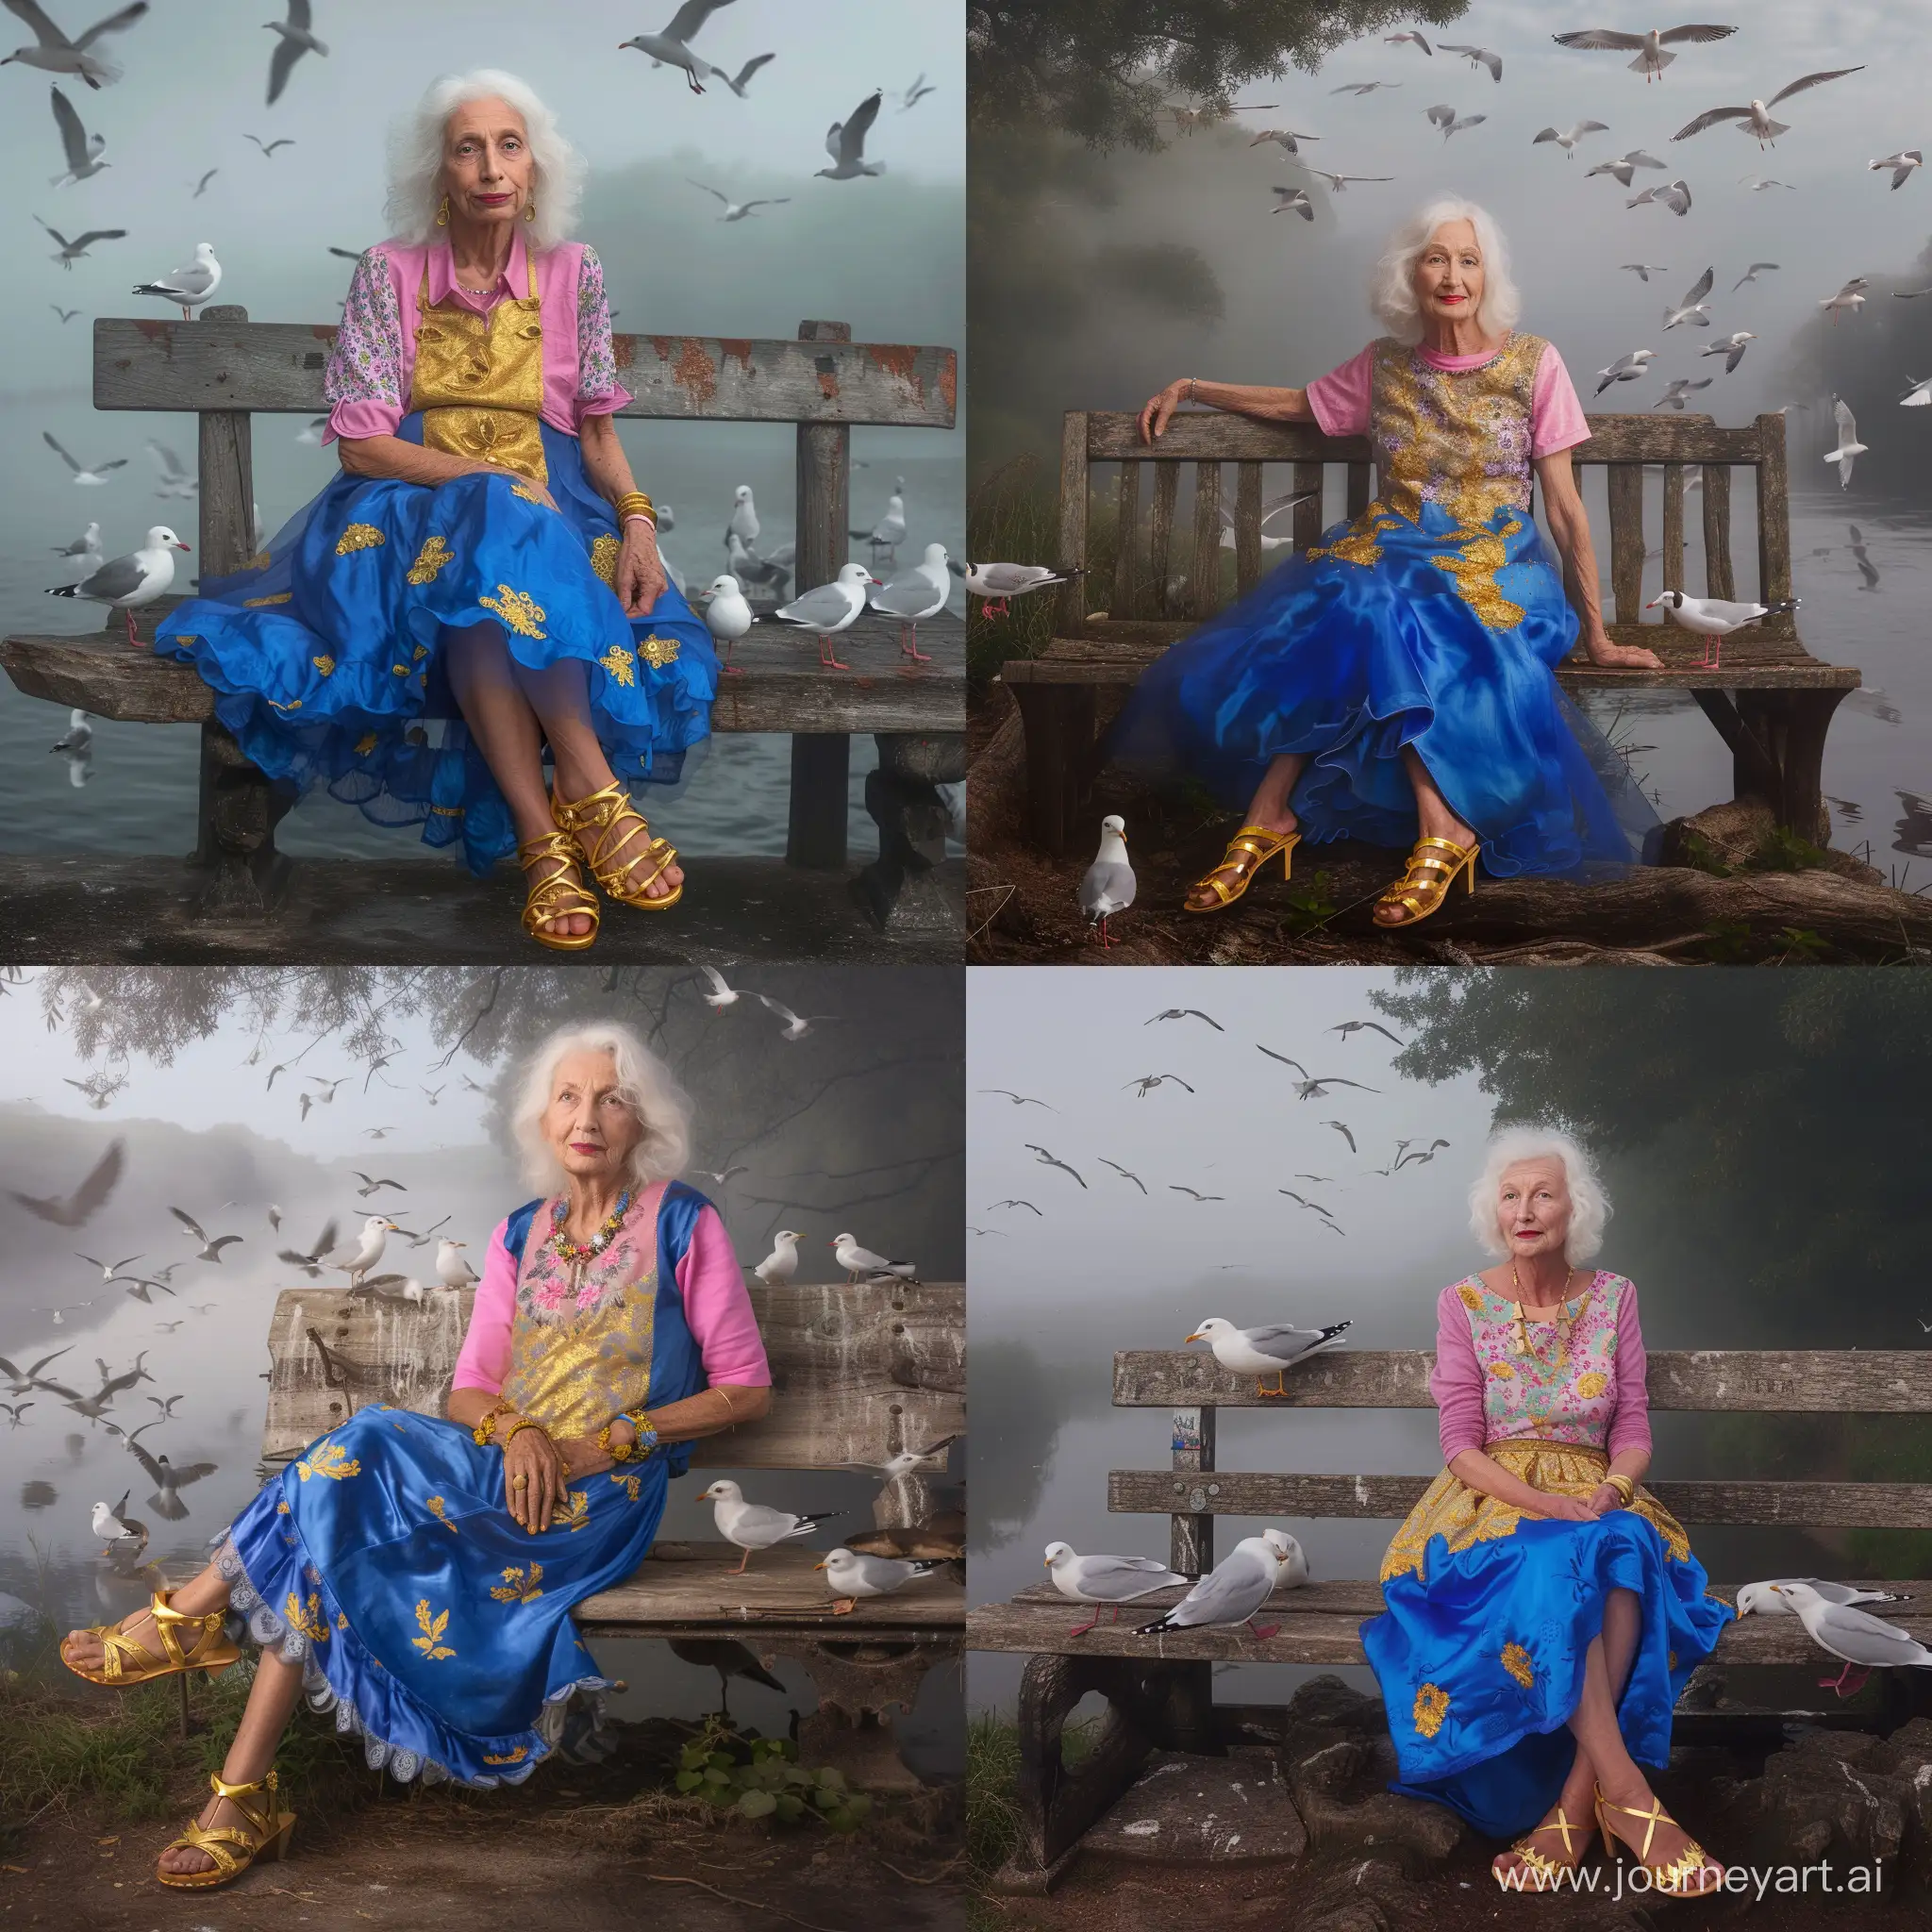  a 60 years old  women white hair      wearing a bleu dress whit gold and yellow    and a pinkshirt with flower printing and golden sandals she is si tting on a old wooden bench by a foggy river and a lot of seagulls flying around total body softlicht and contrast 50mm fuji xt4 fotorealistisch